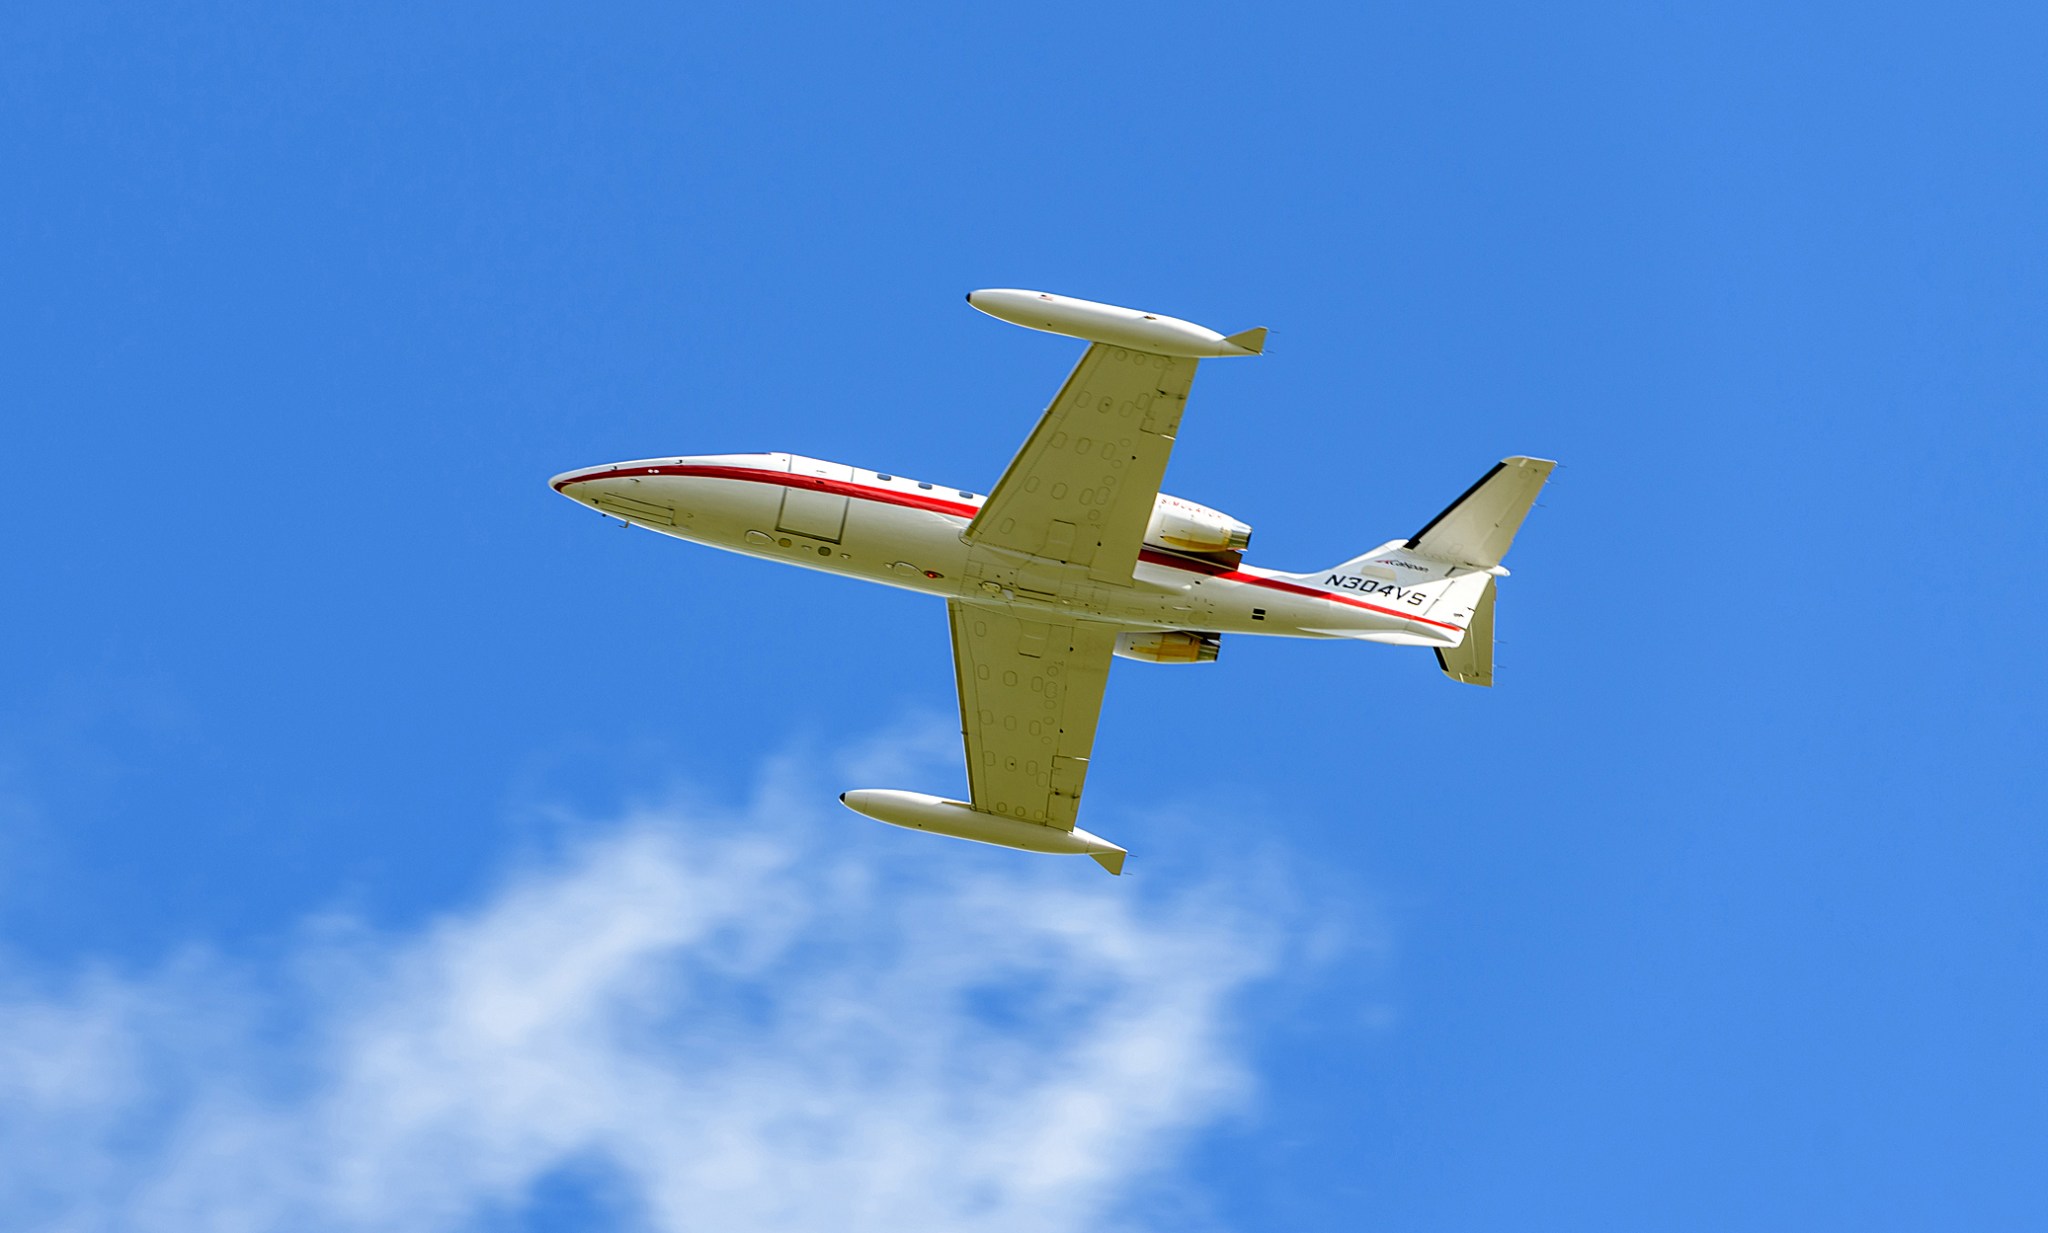 Bottom view of the Learjet 25 aircraft in flight against blue skies.